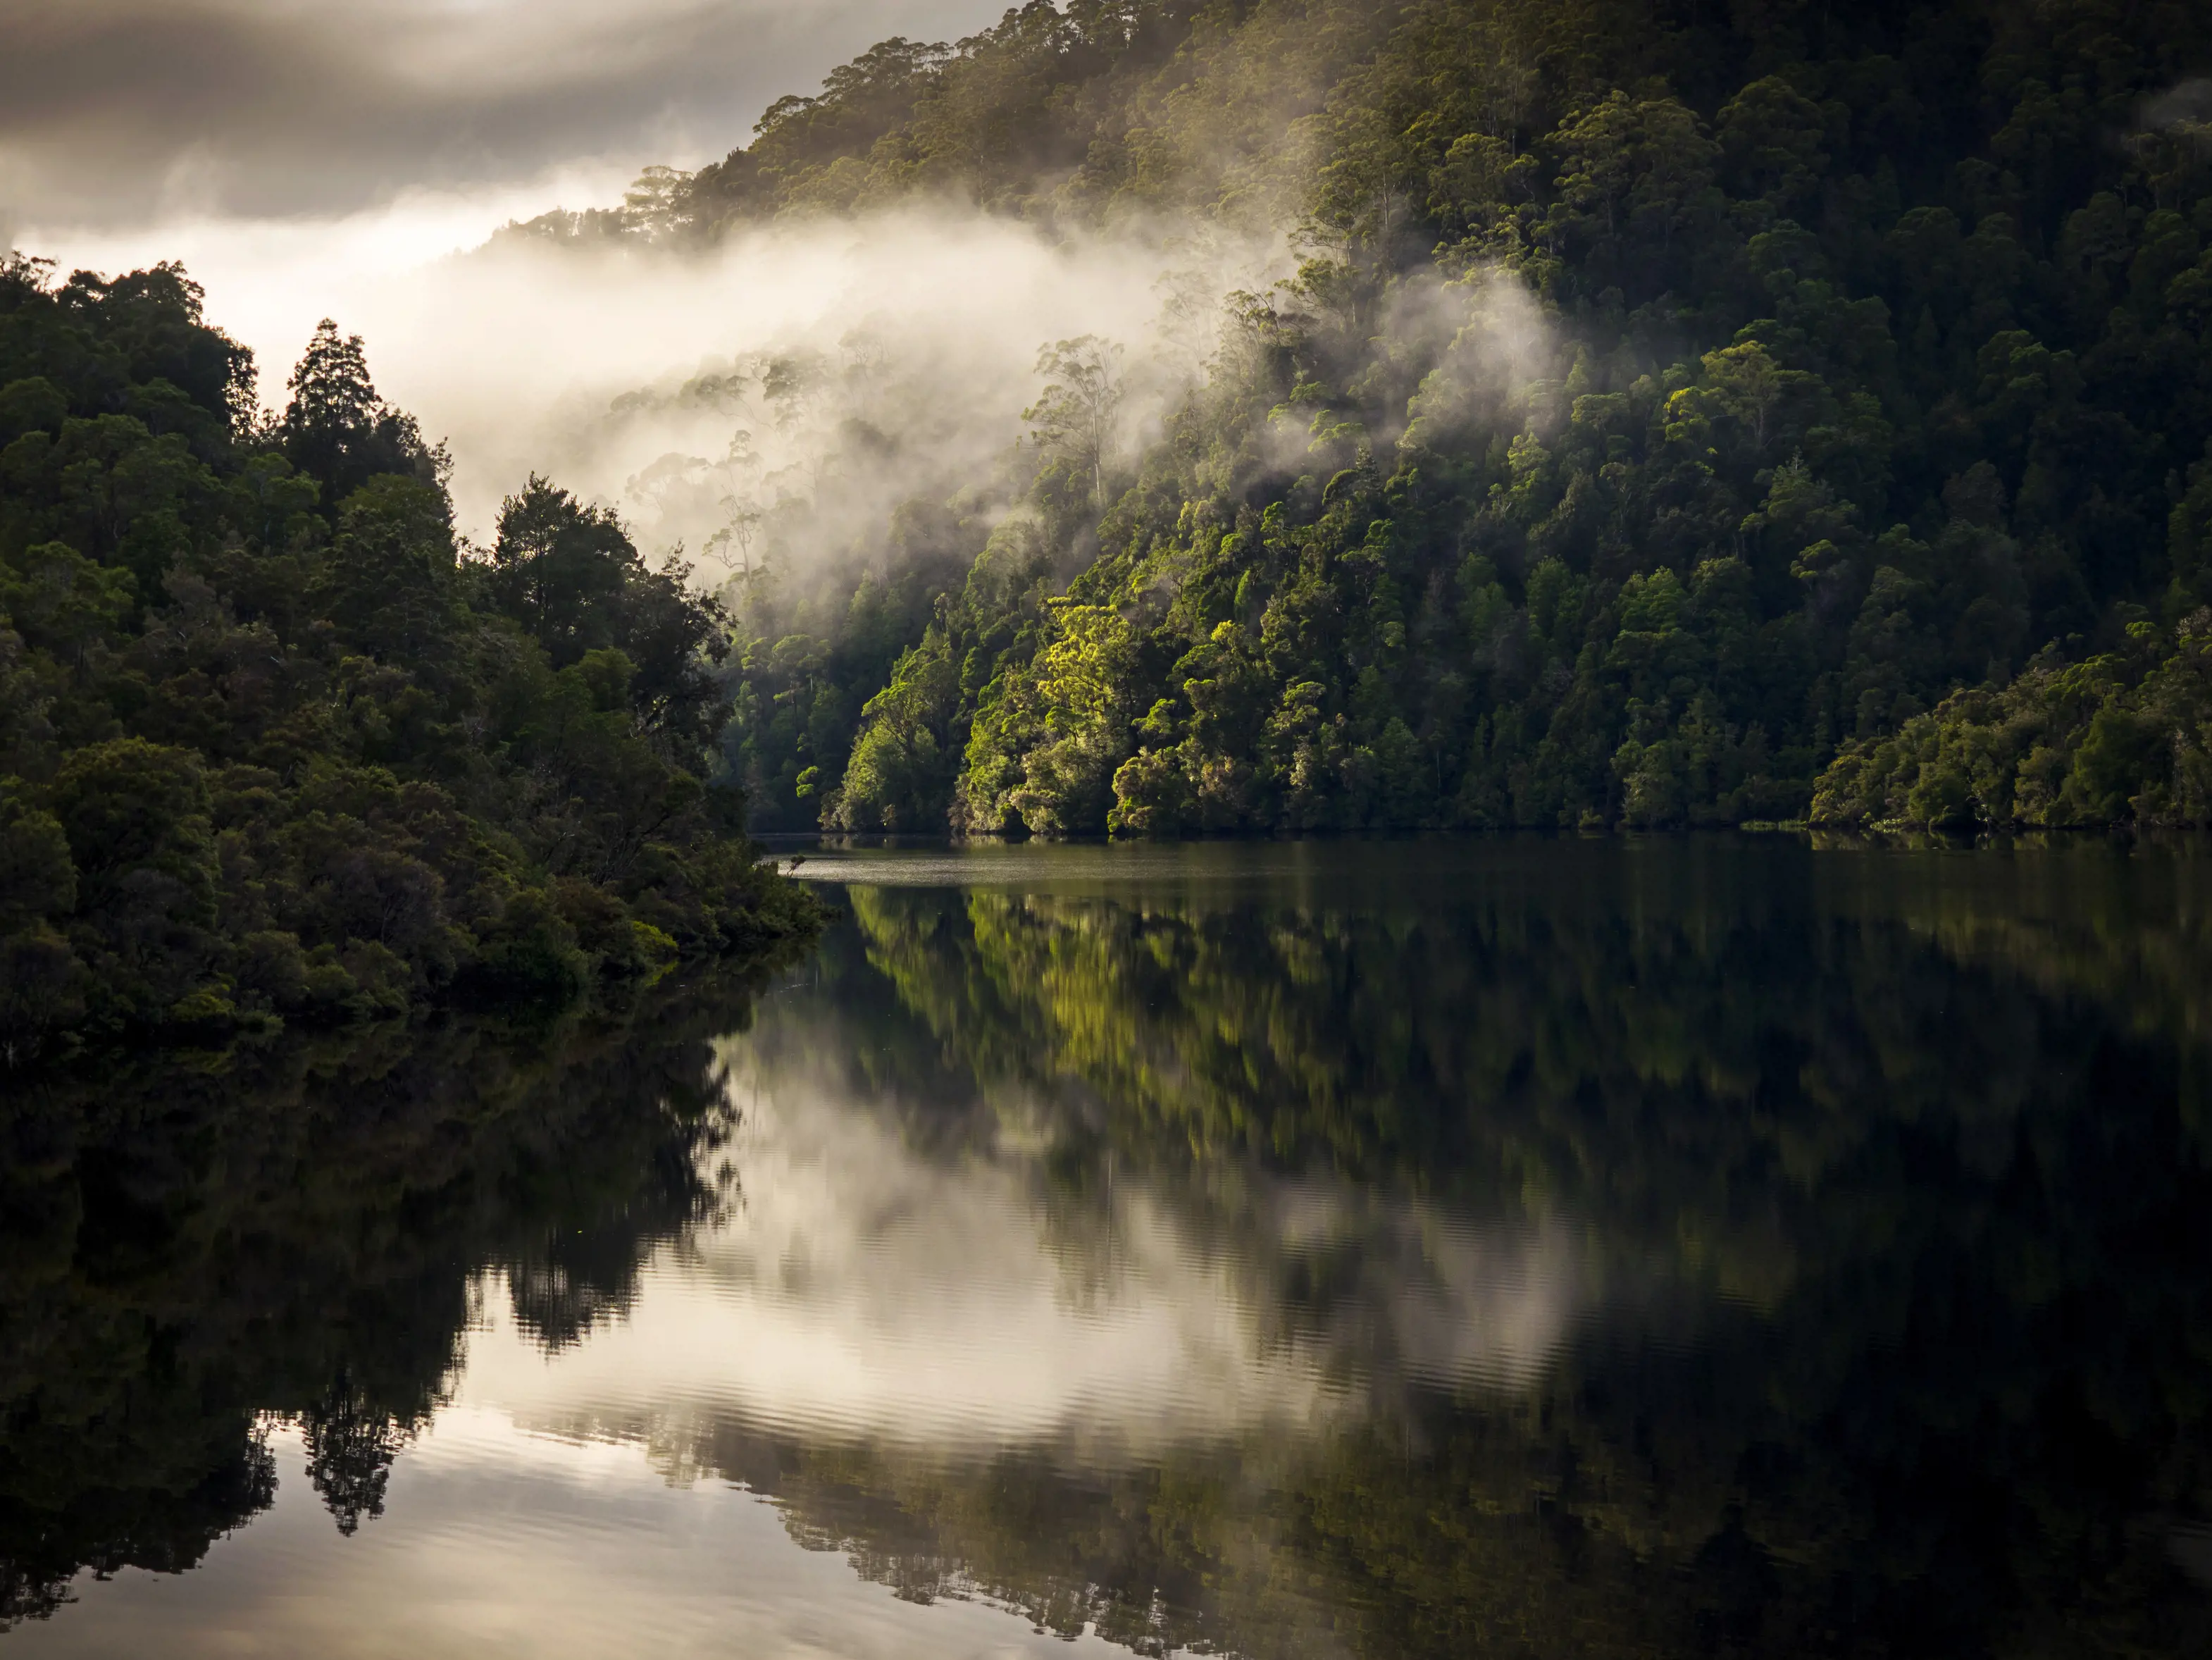 Stunning and dramatic image of the Gordon River taken during sunrise, as mist hovers over the water, surrounded by lush forest.